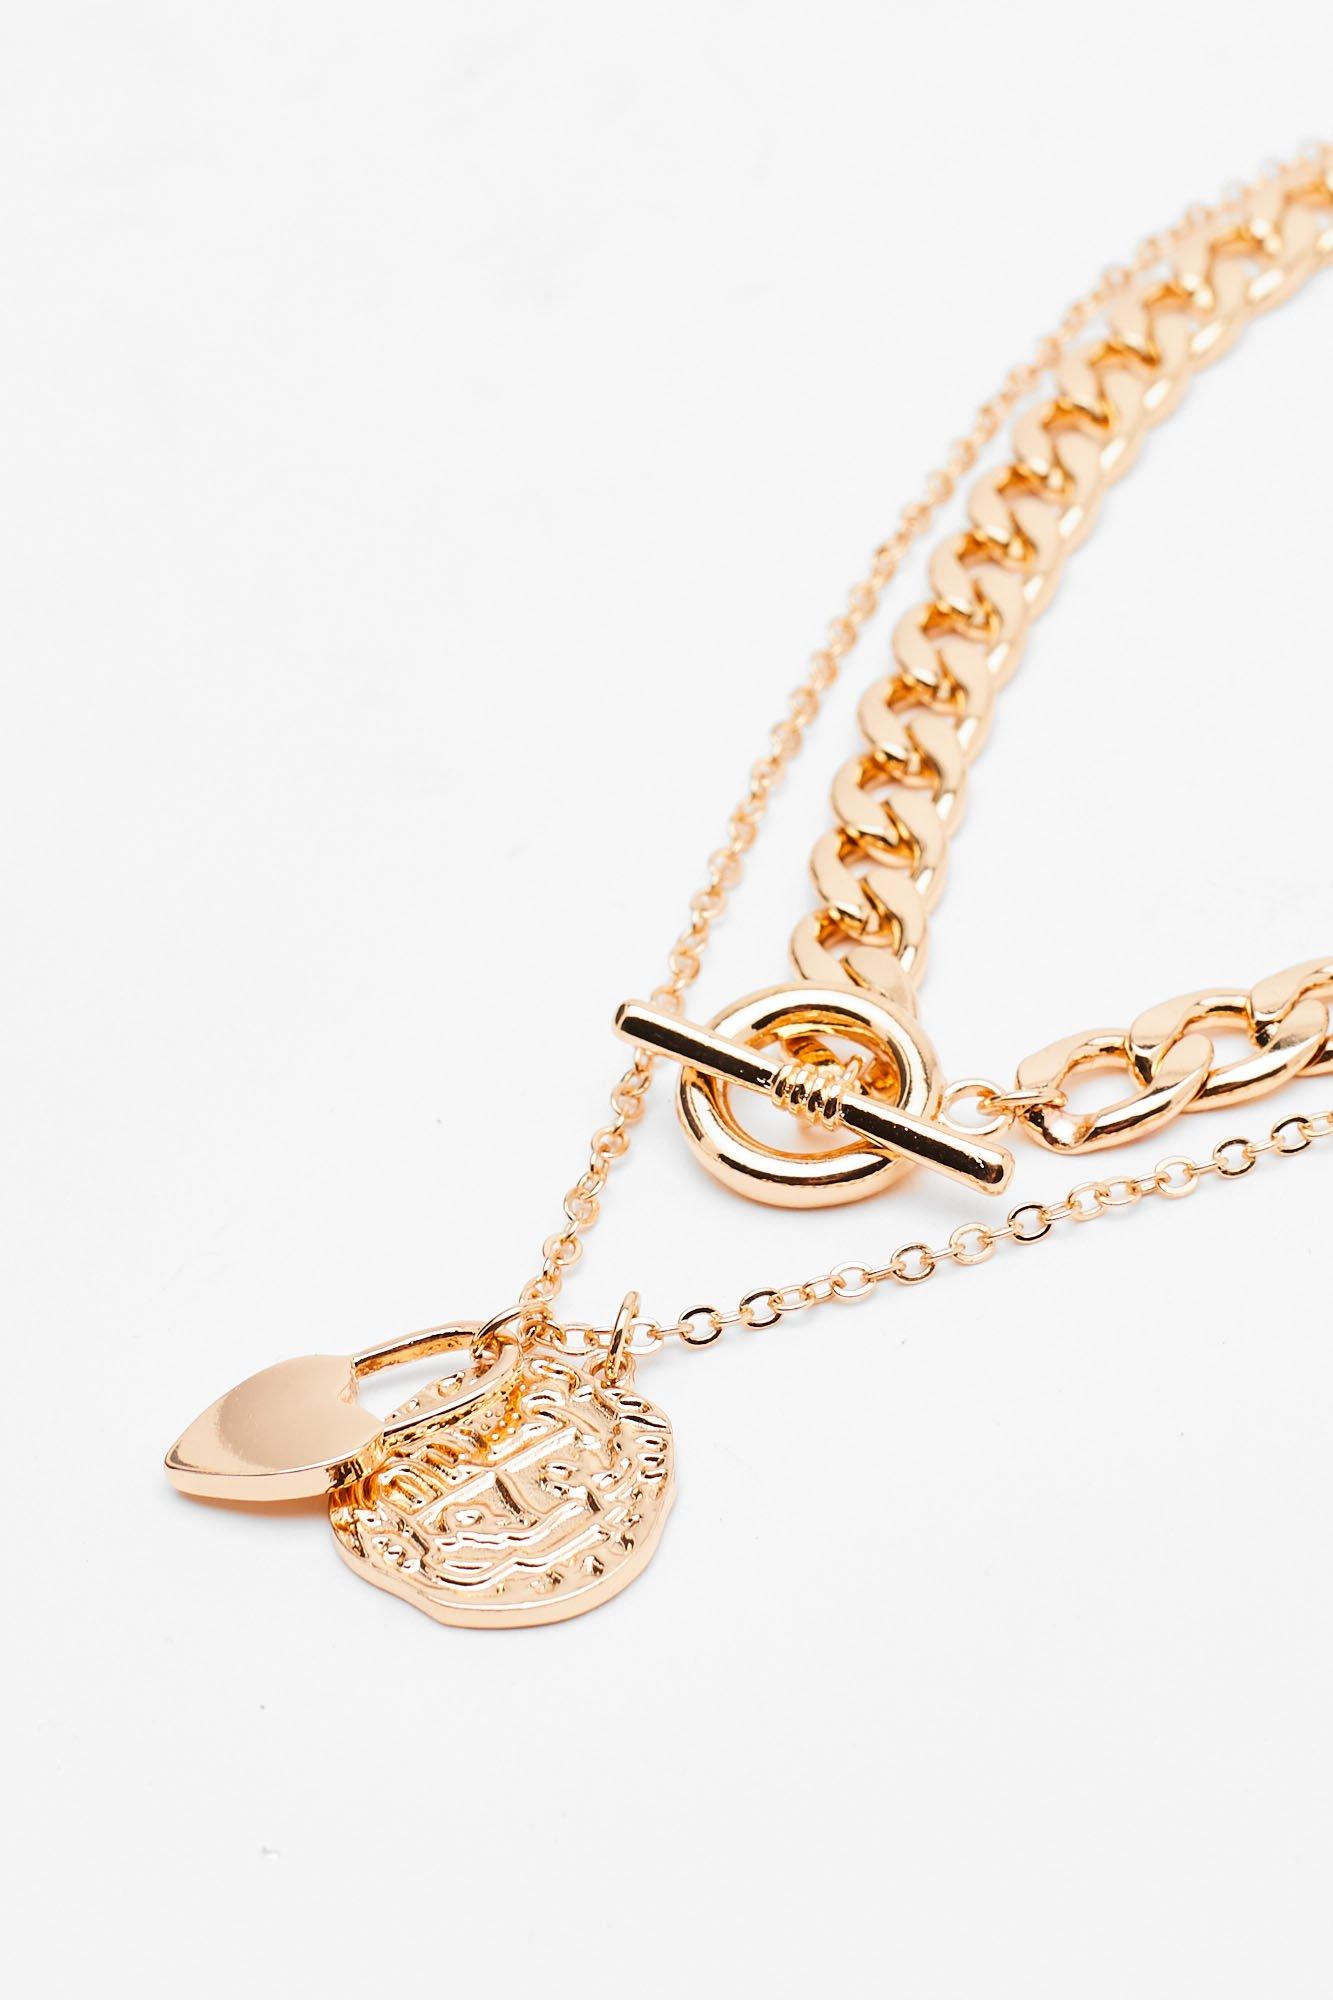 3 Layer Chain Necklace With Padlock